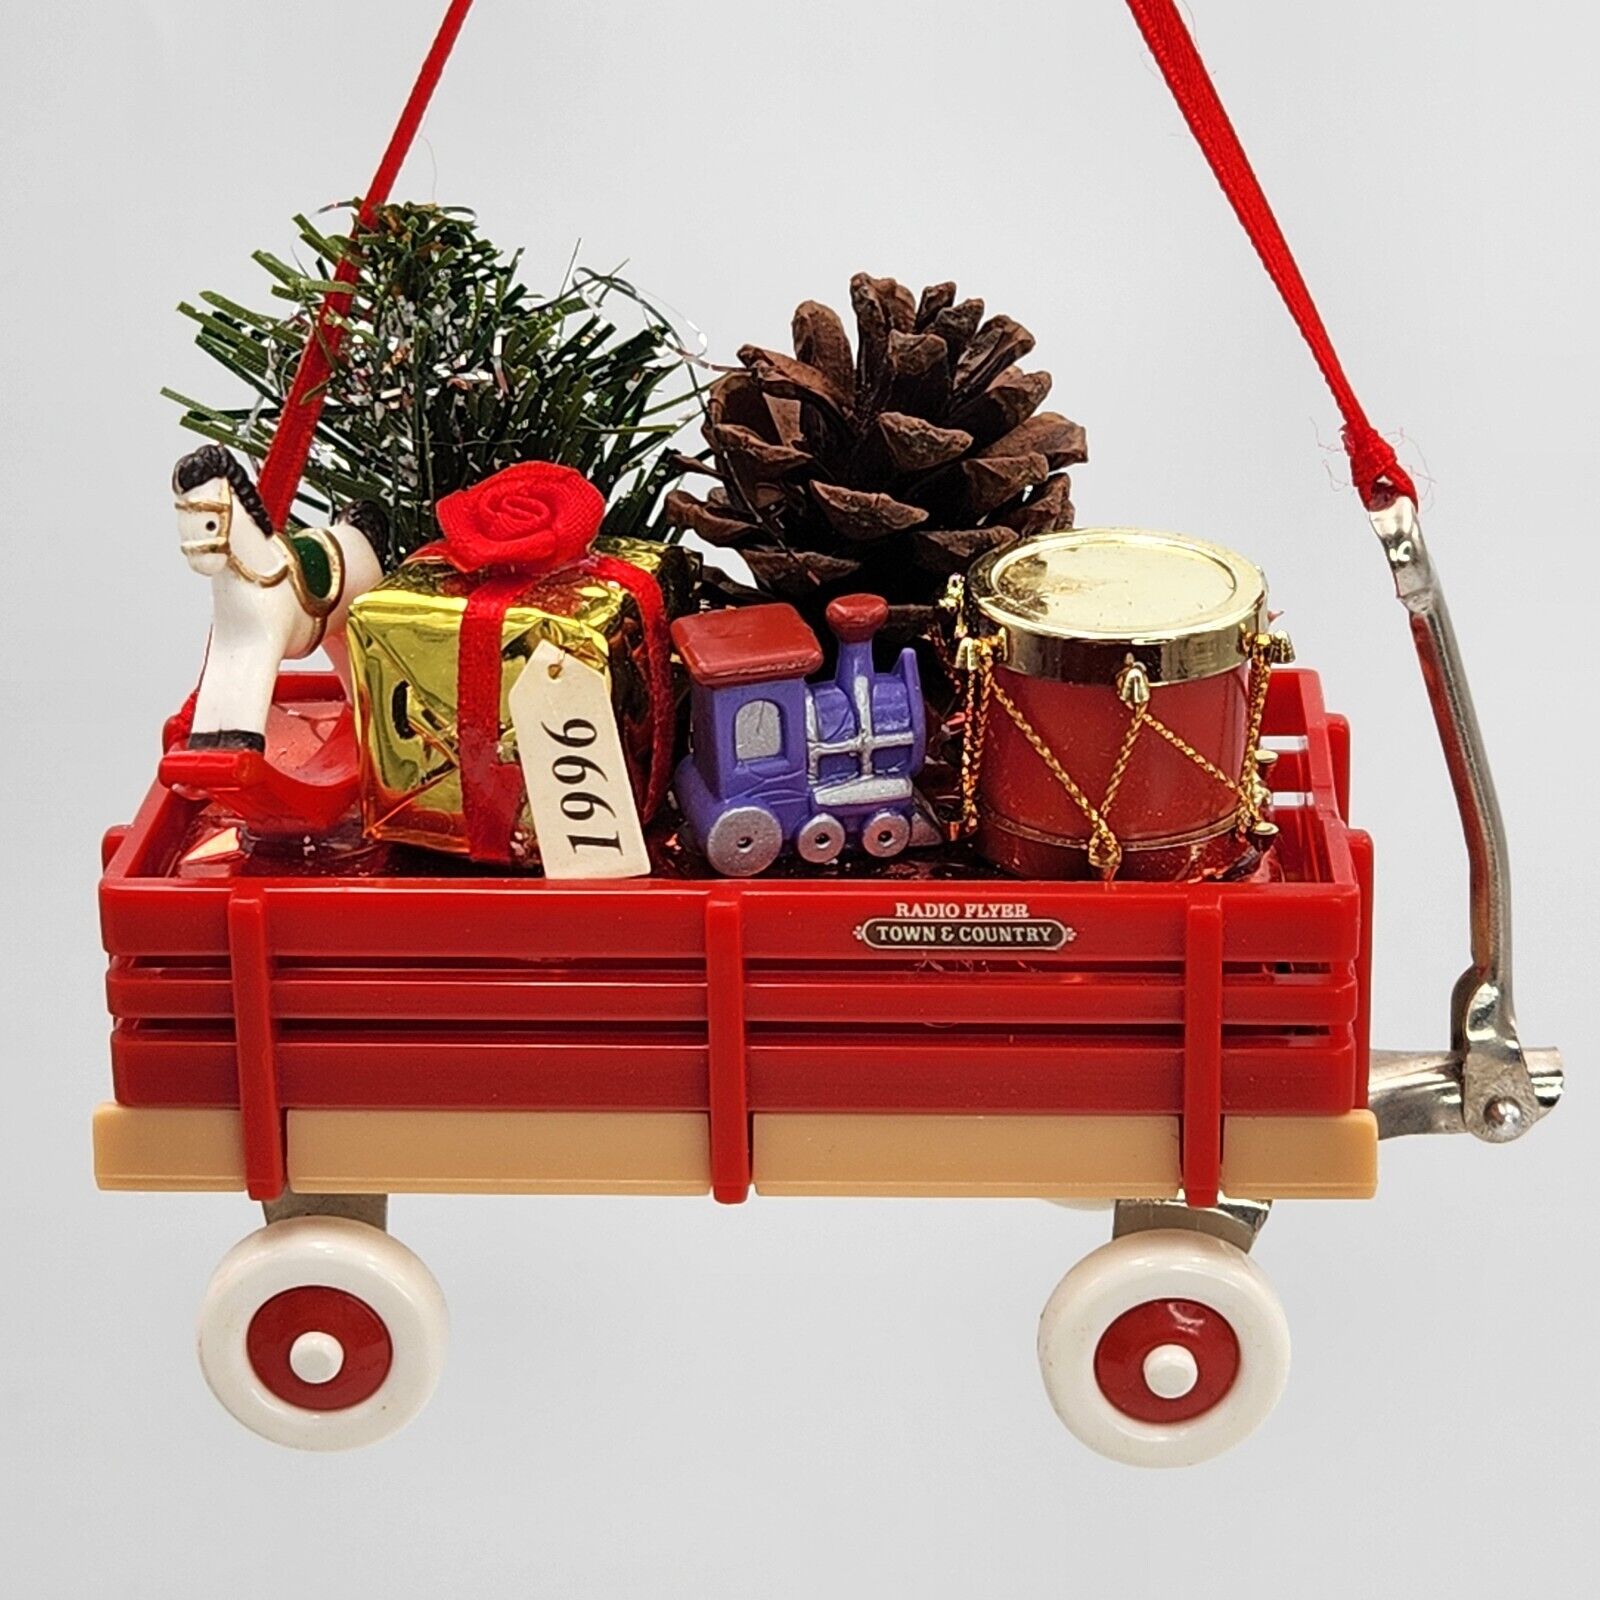 Radio Flyer Red Wagon Christmas Ornament 1996 Town And Country Model 110